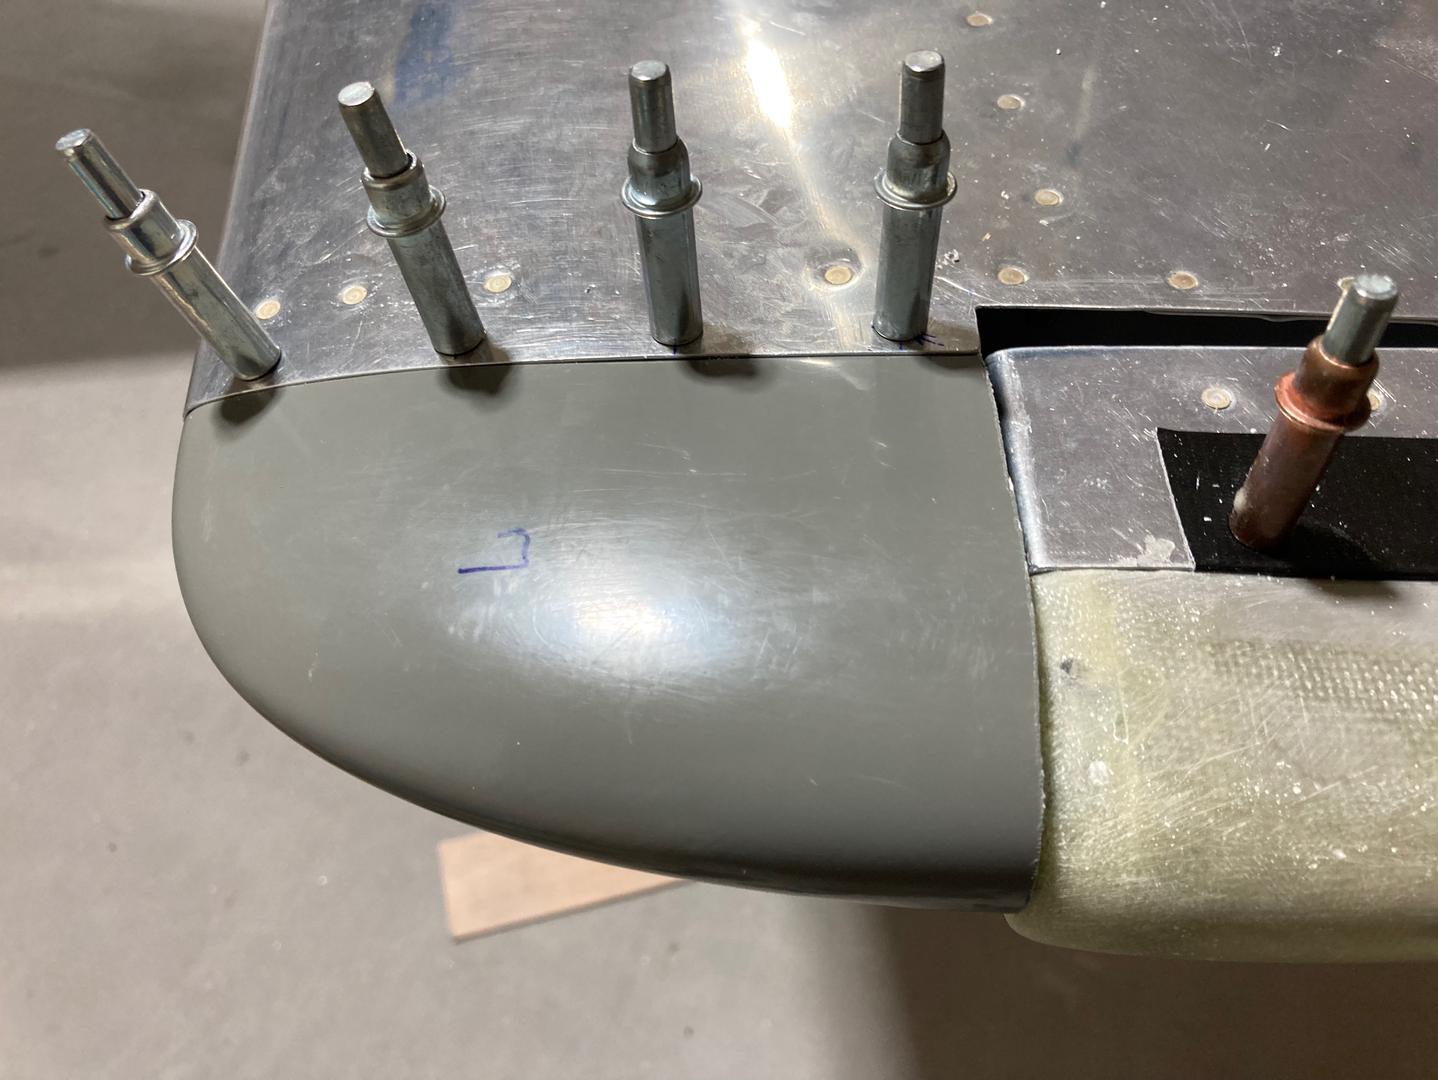 The left fairing is drilled.